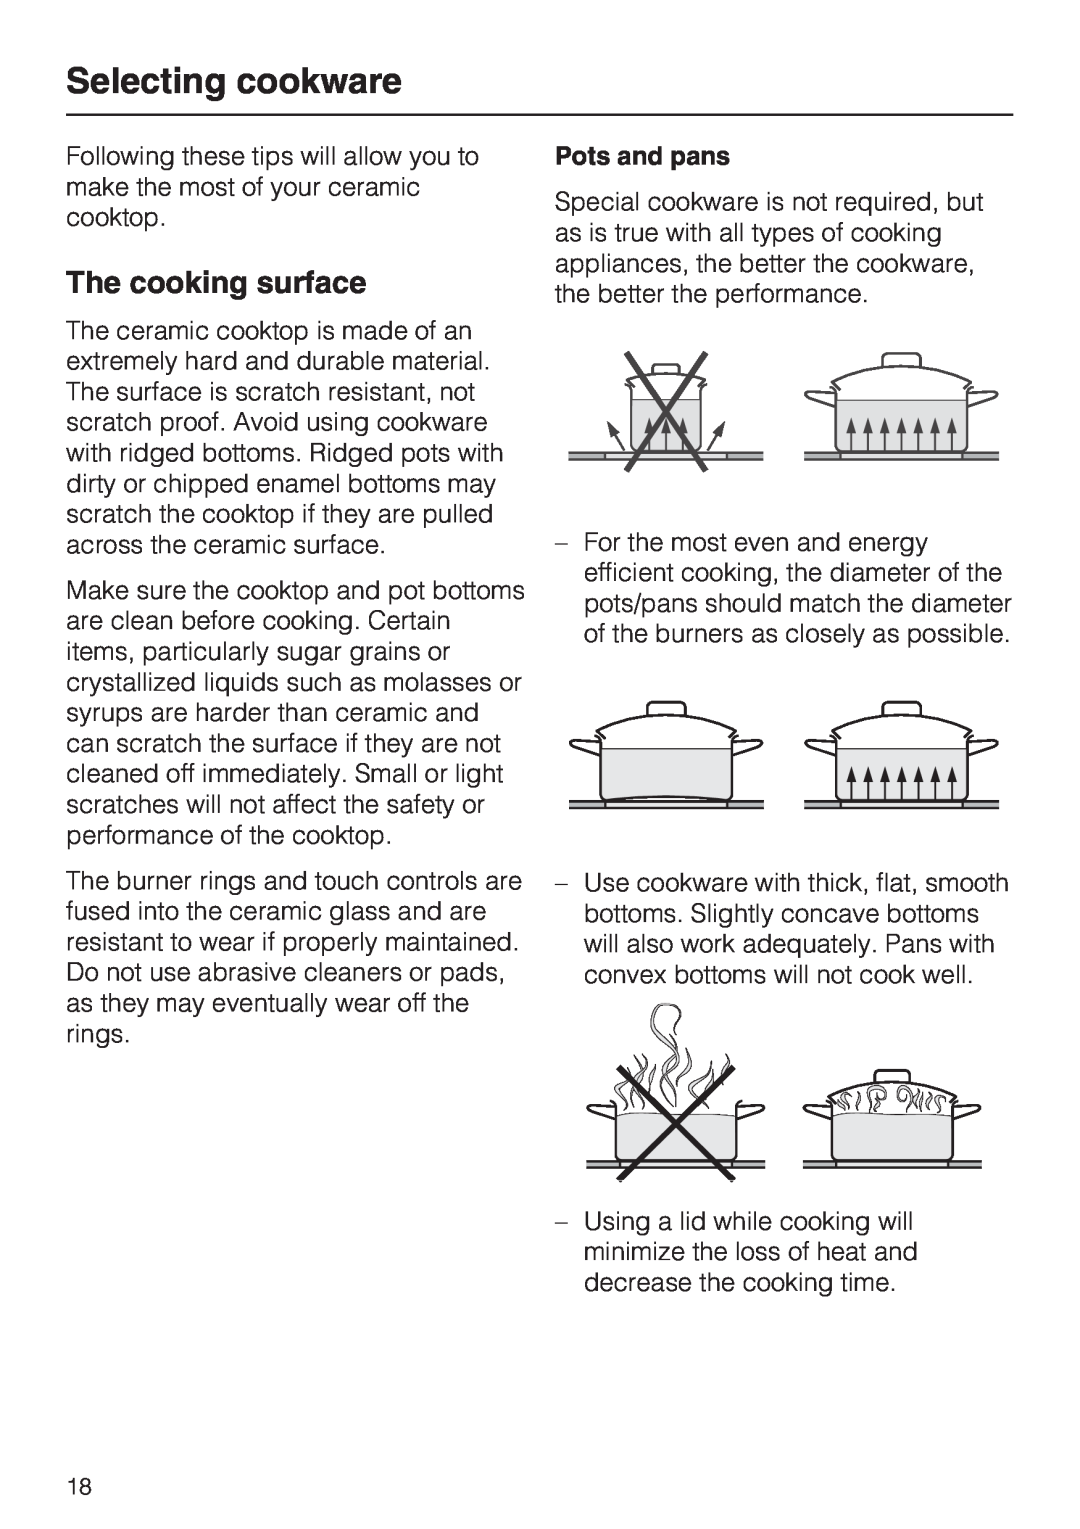 Miele KM5676 installation instructions Selecting cookware, The cooking surface, Pots and pans 